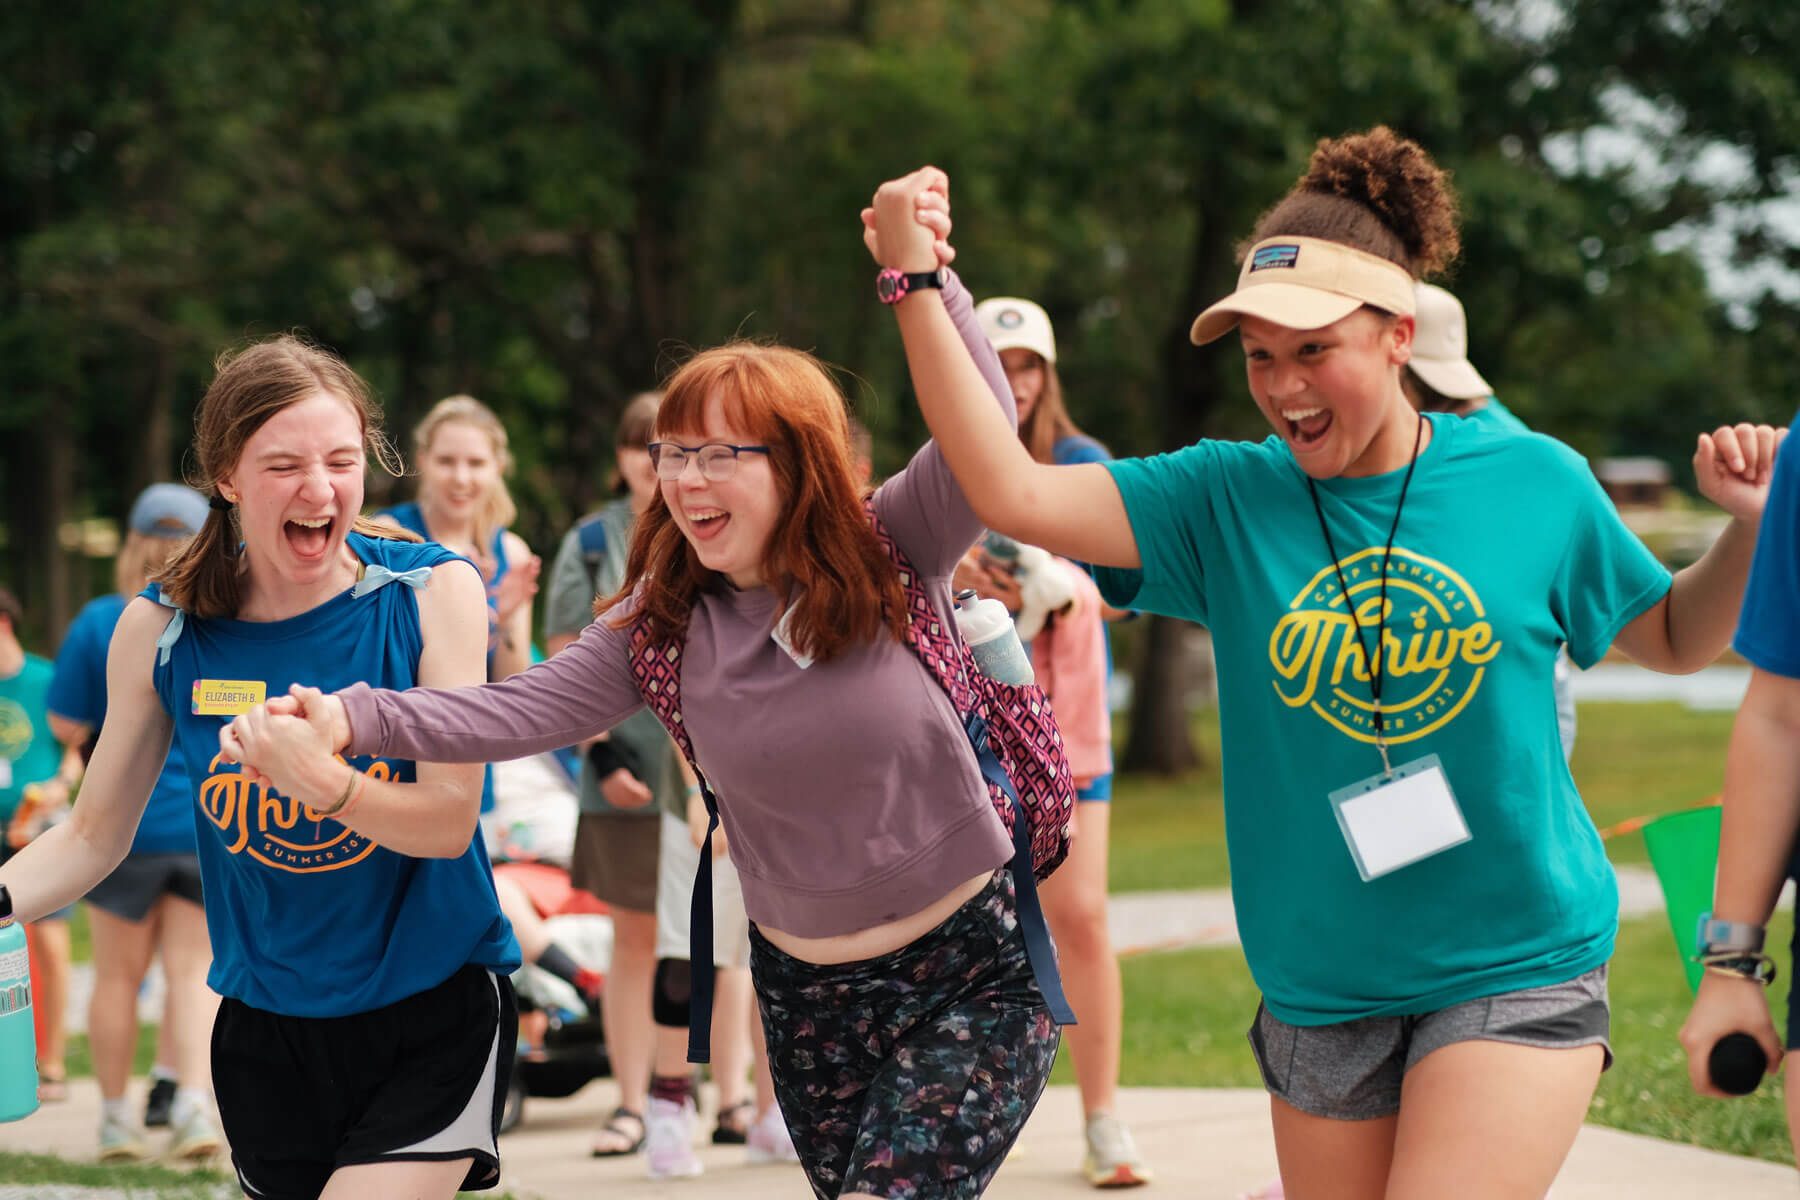 Camp counselors walking hand in hand smiling and laughing